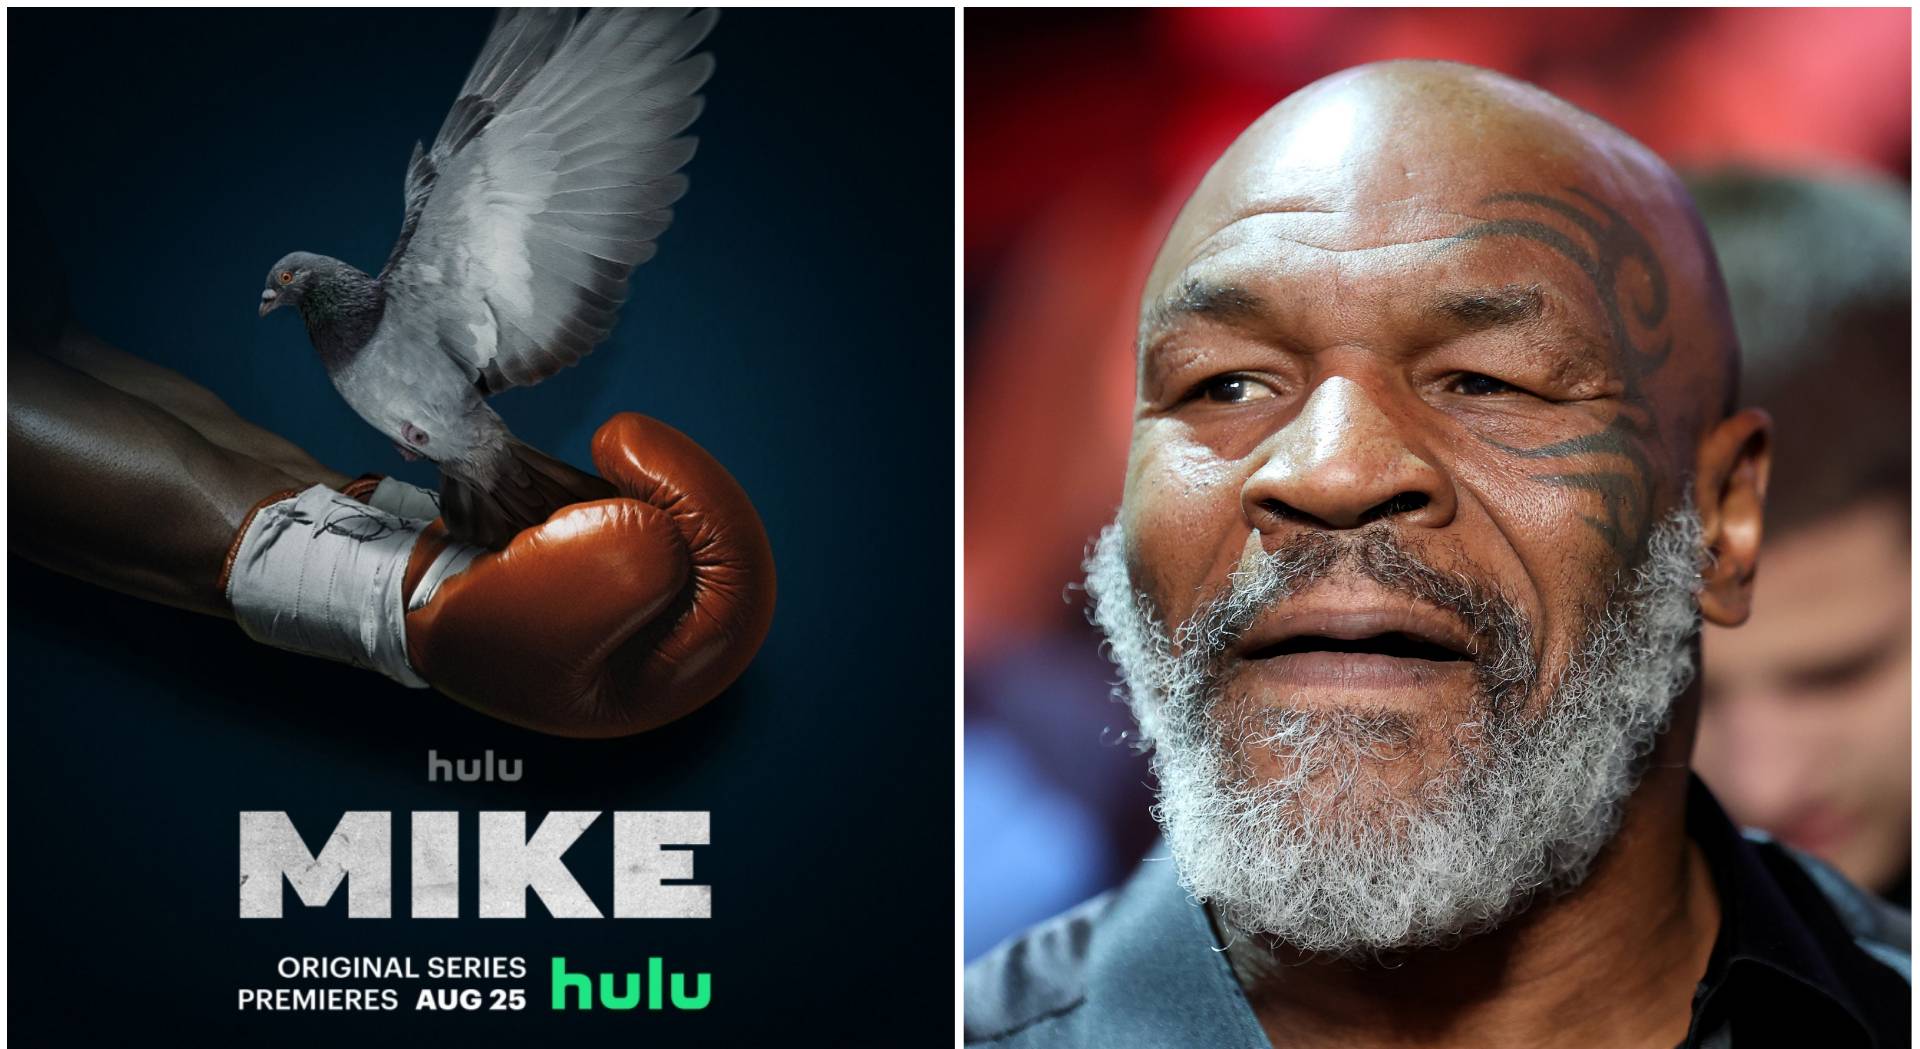 mike-tyson-hulu-television-series